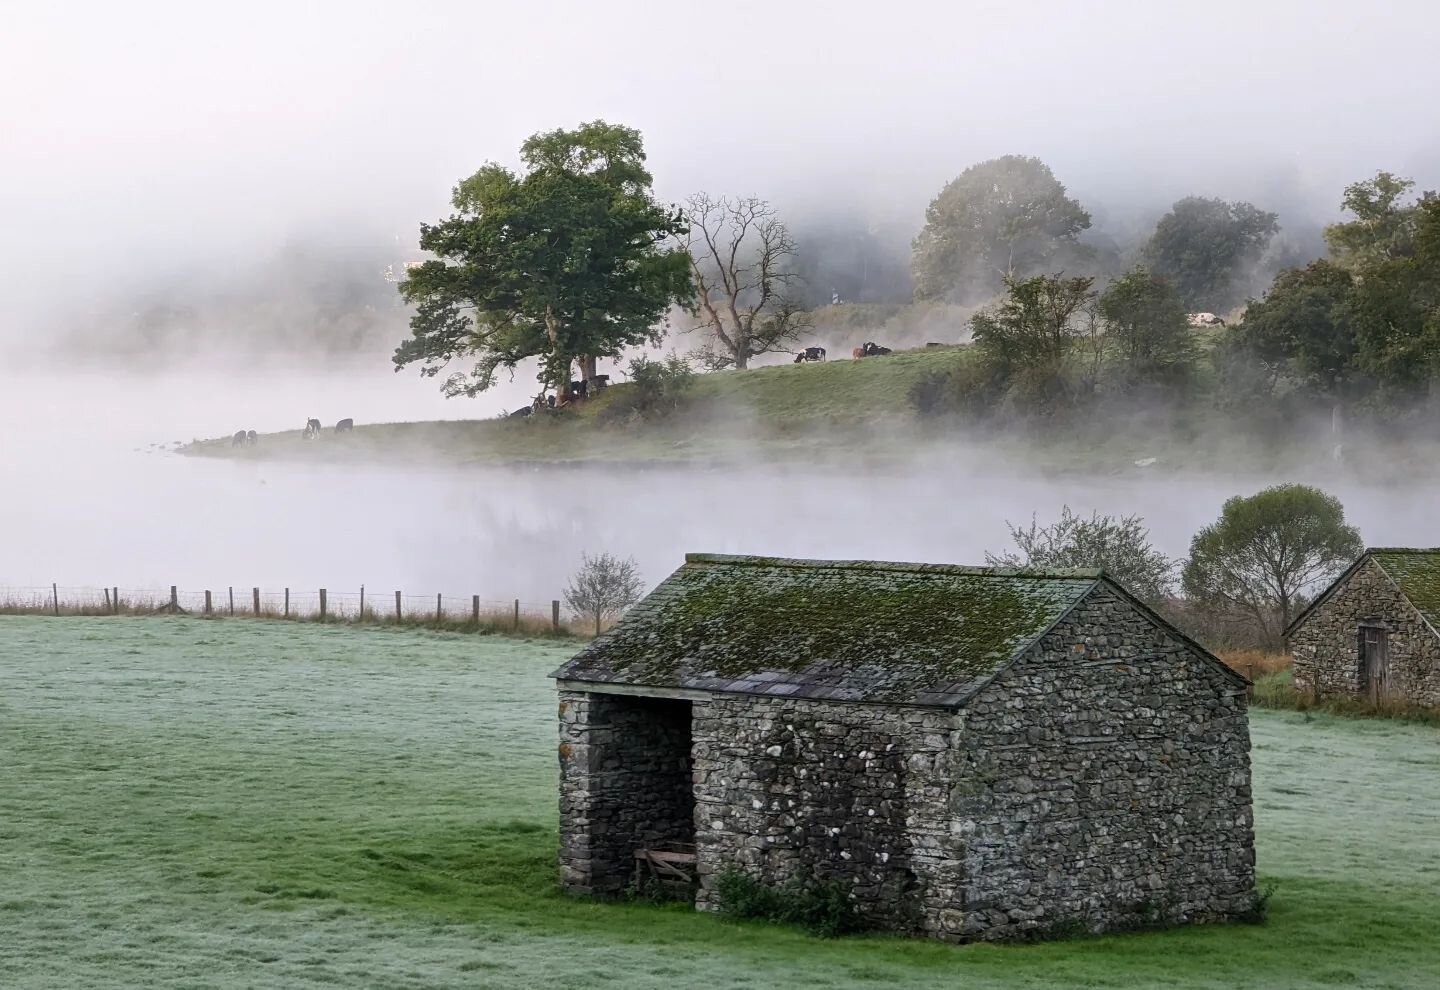 Hawks head - Lake District morning fog and frost

#lakedistrict #fog #frost #barns #lake #tree #cows #morning #sunrise #photography #landscapephotography #landscape #instagood #holiday #uk